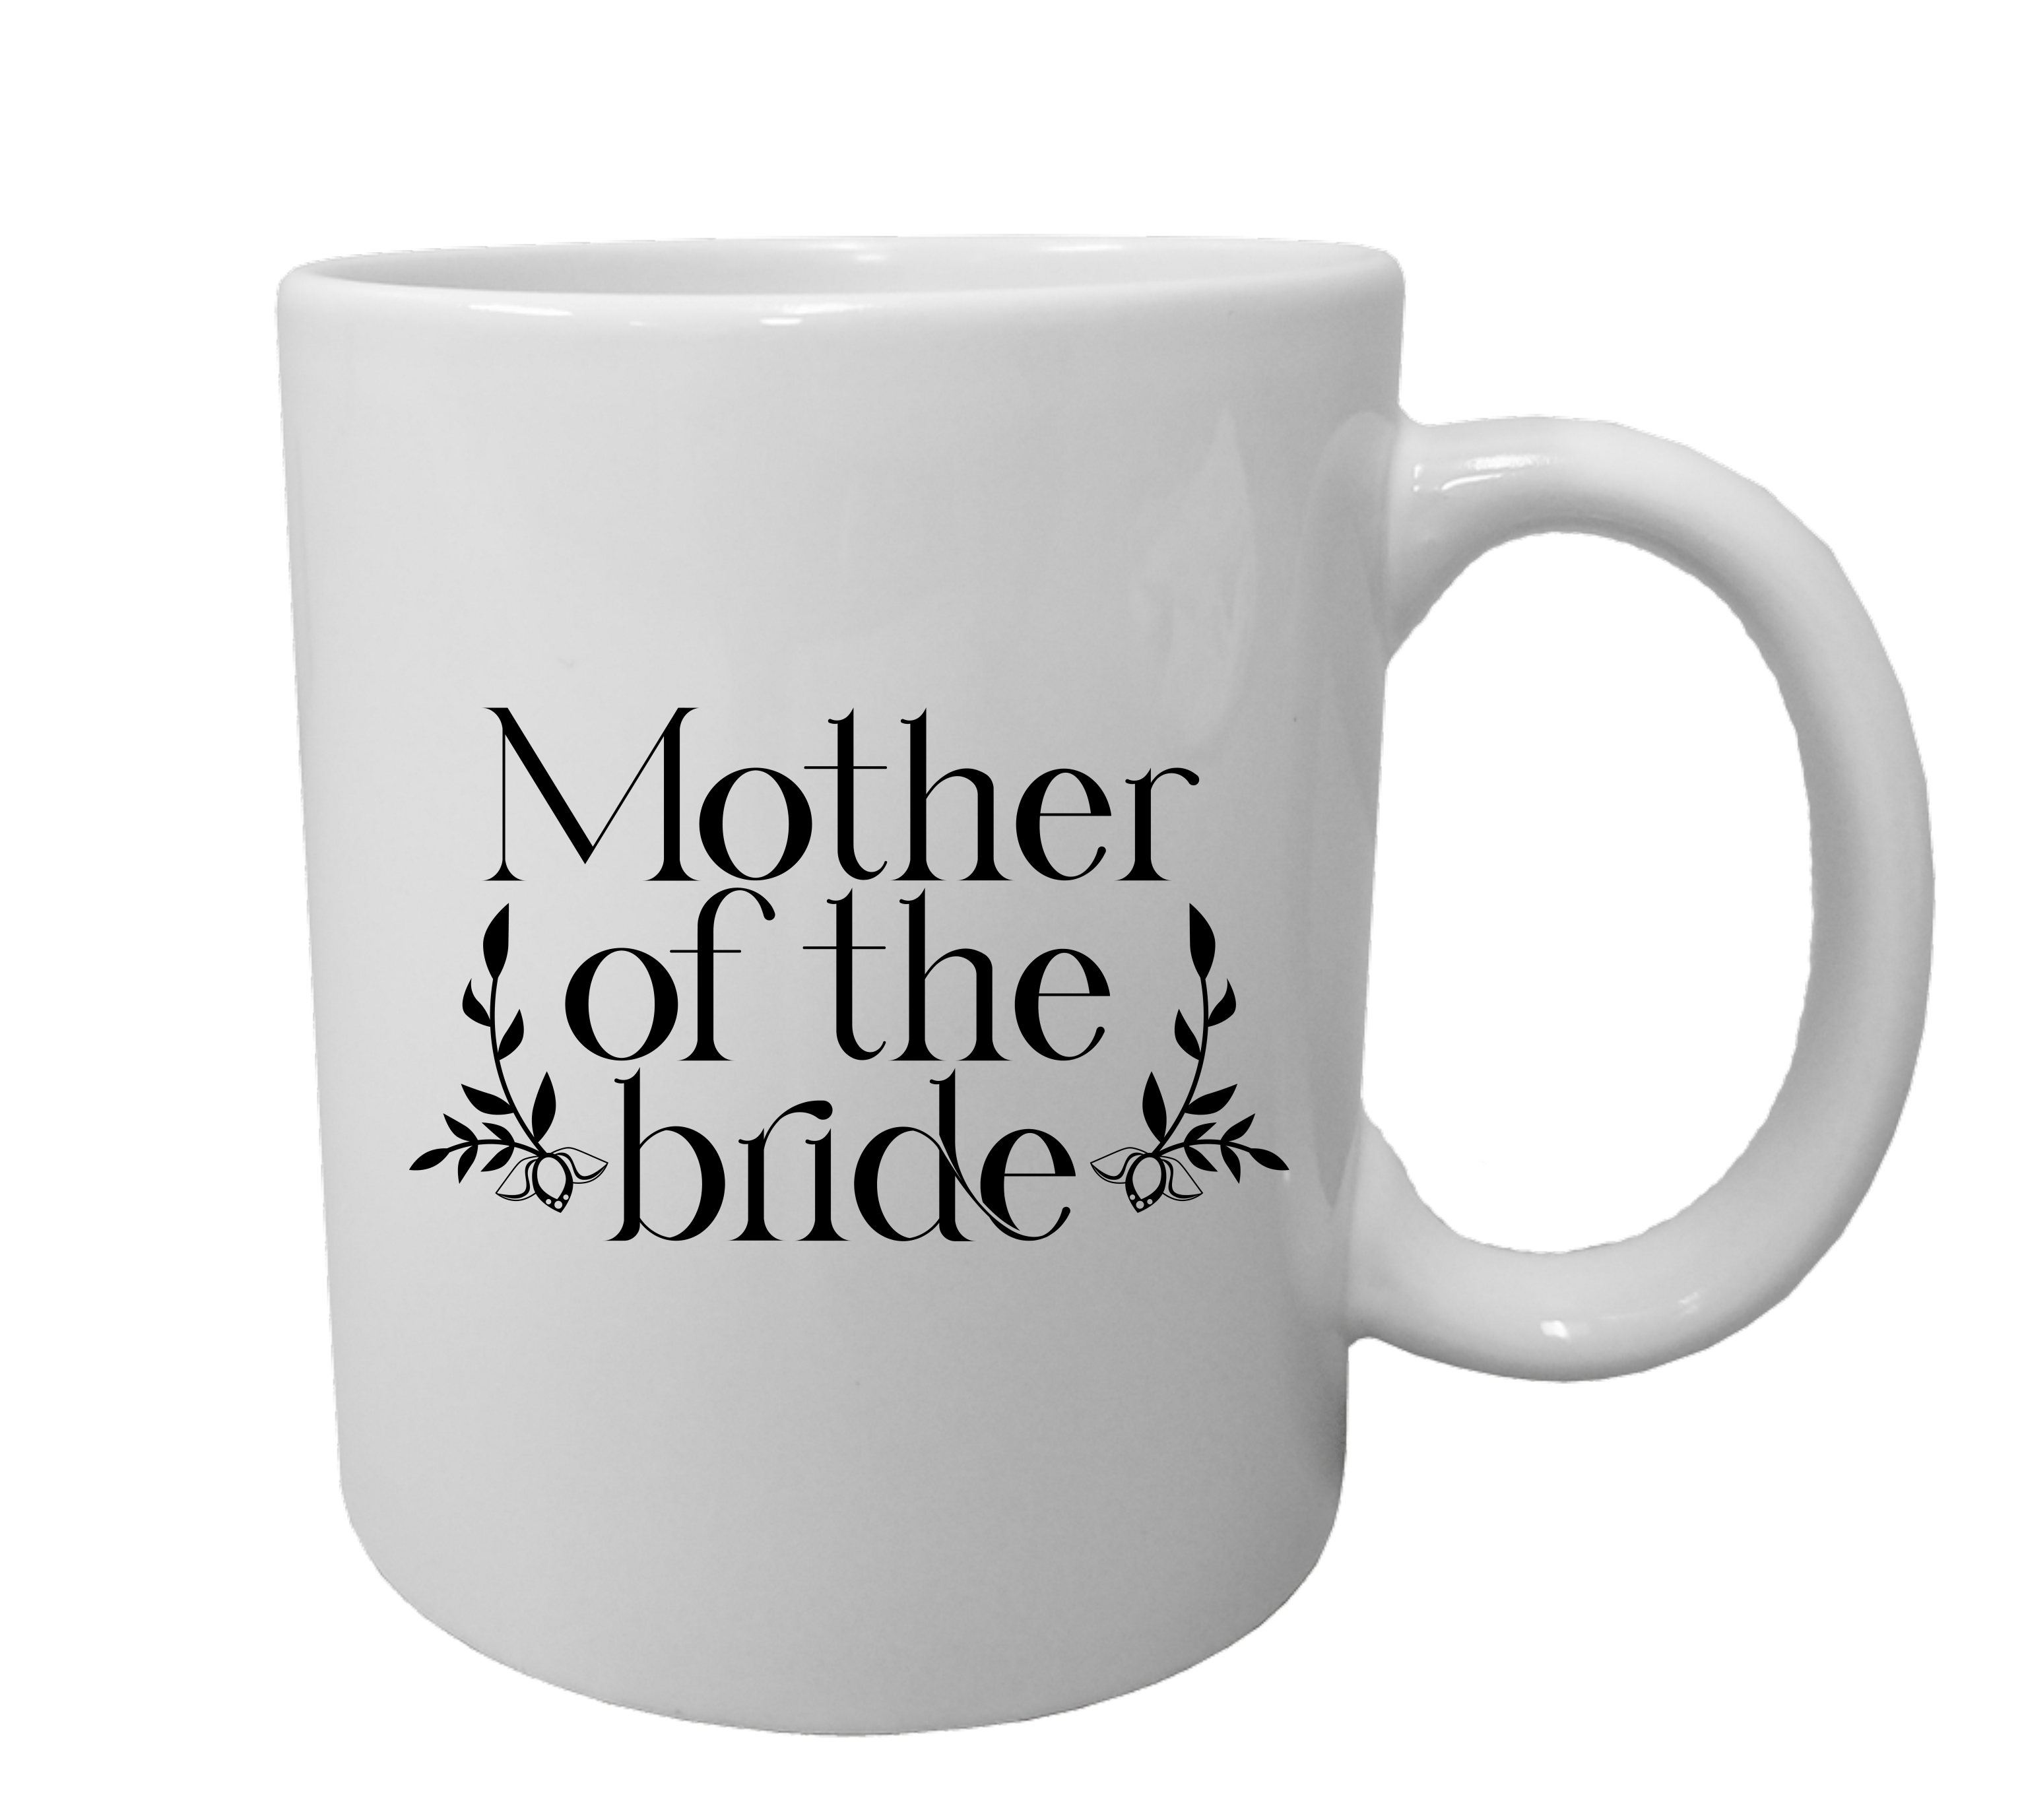 Simple Sublimated Mother of the Bride or Mother of the Groom Coffee Mug - High Quality - Fast Shipping